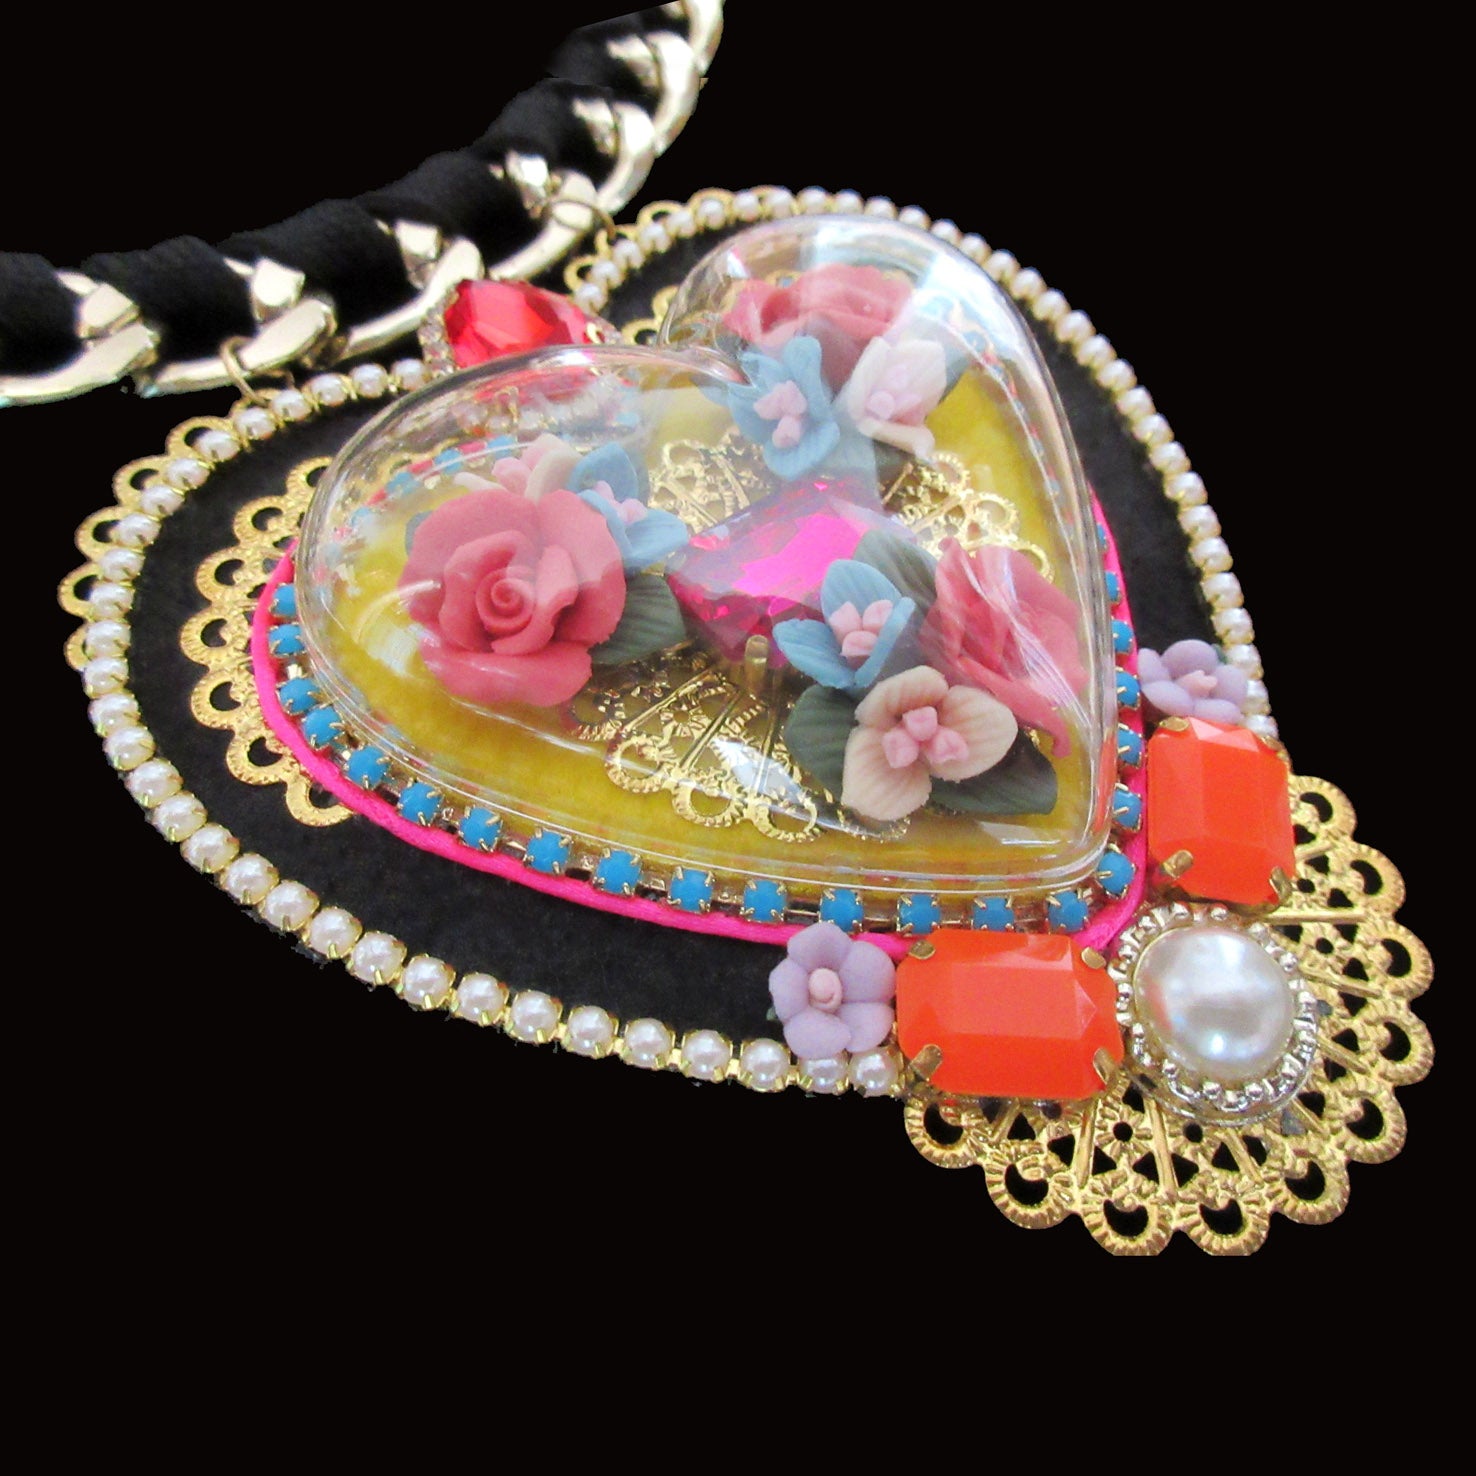 mouchkine jewelry chic and trendy handmade necklace with a heart shape